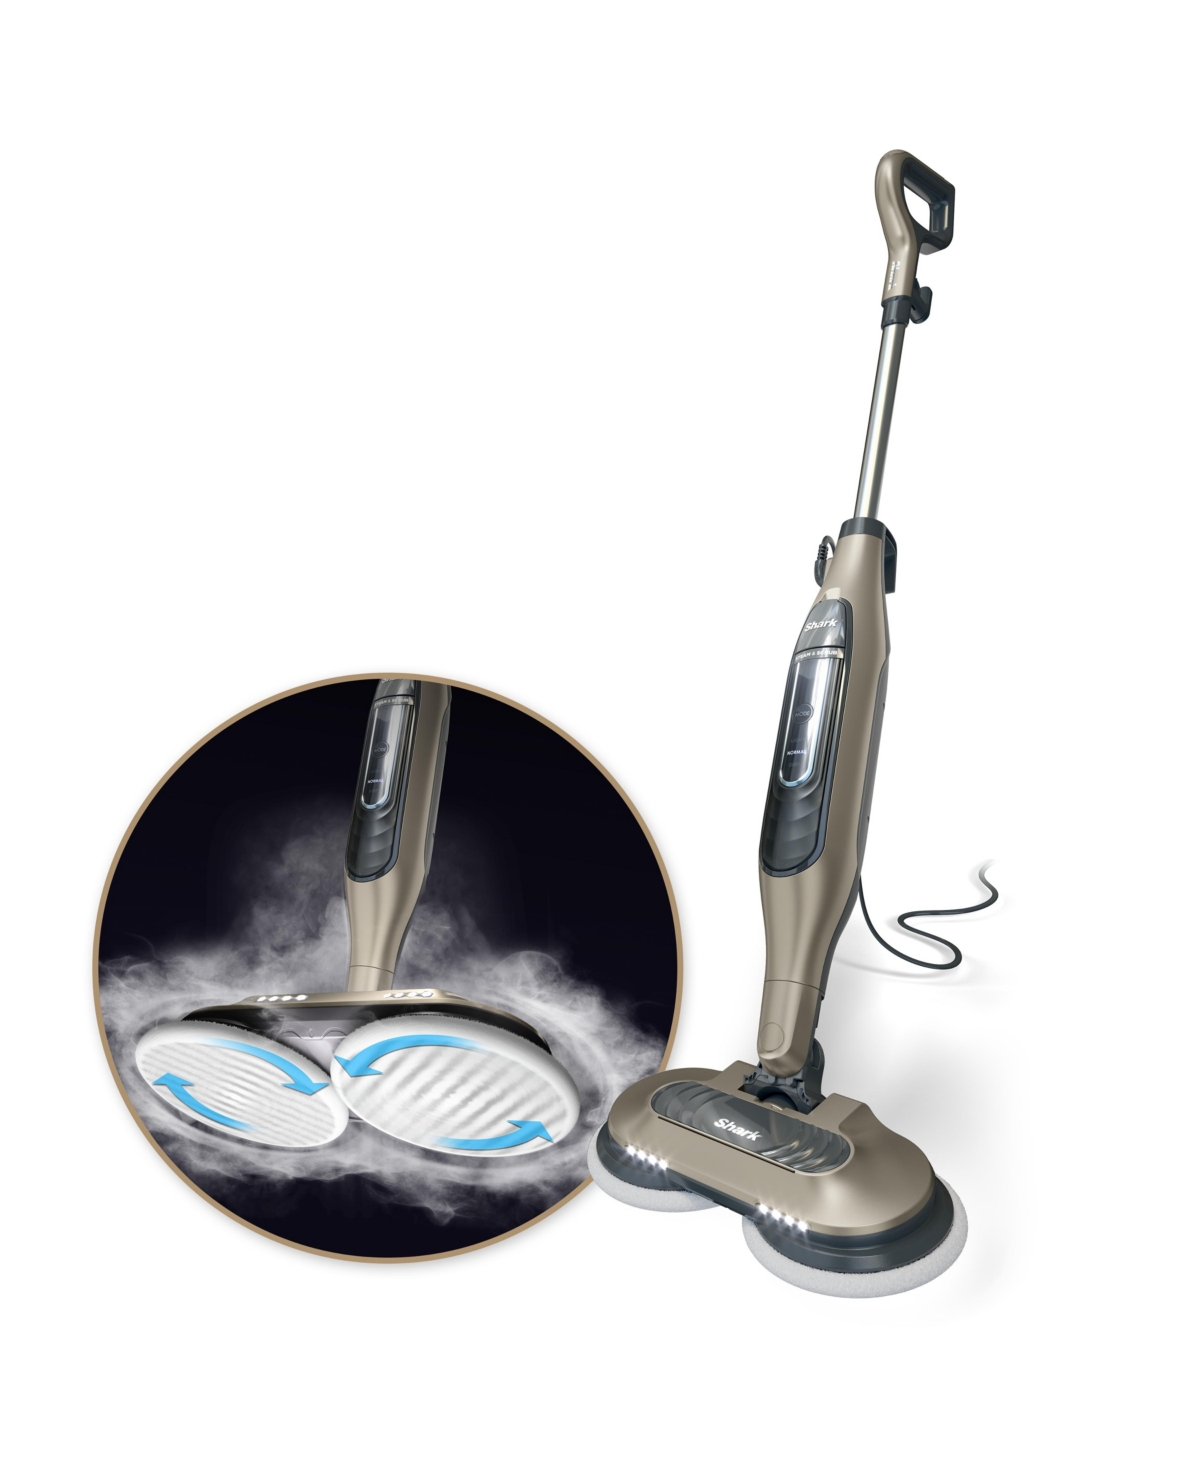 Shark Steam & Scrub All-in-one Scrubbing And Sanitizing Hard Floor Steam Mop S7001 In Taupe